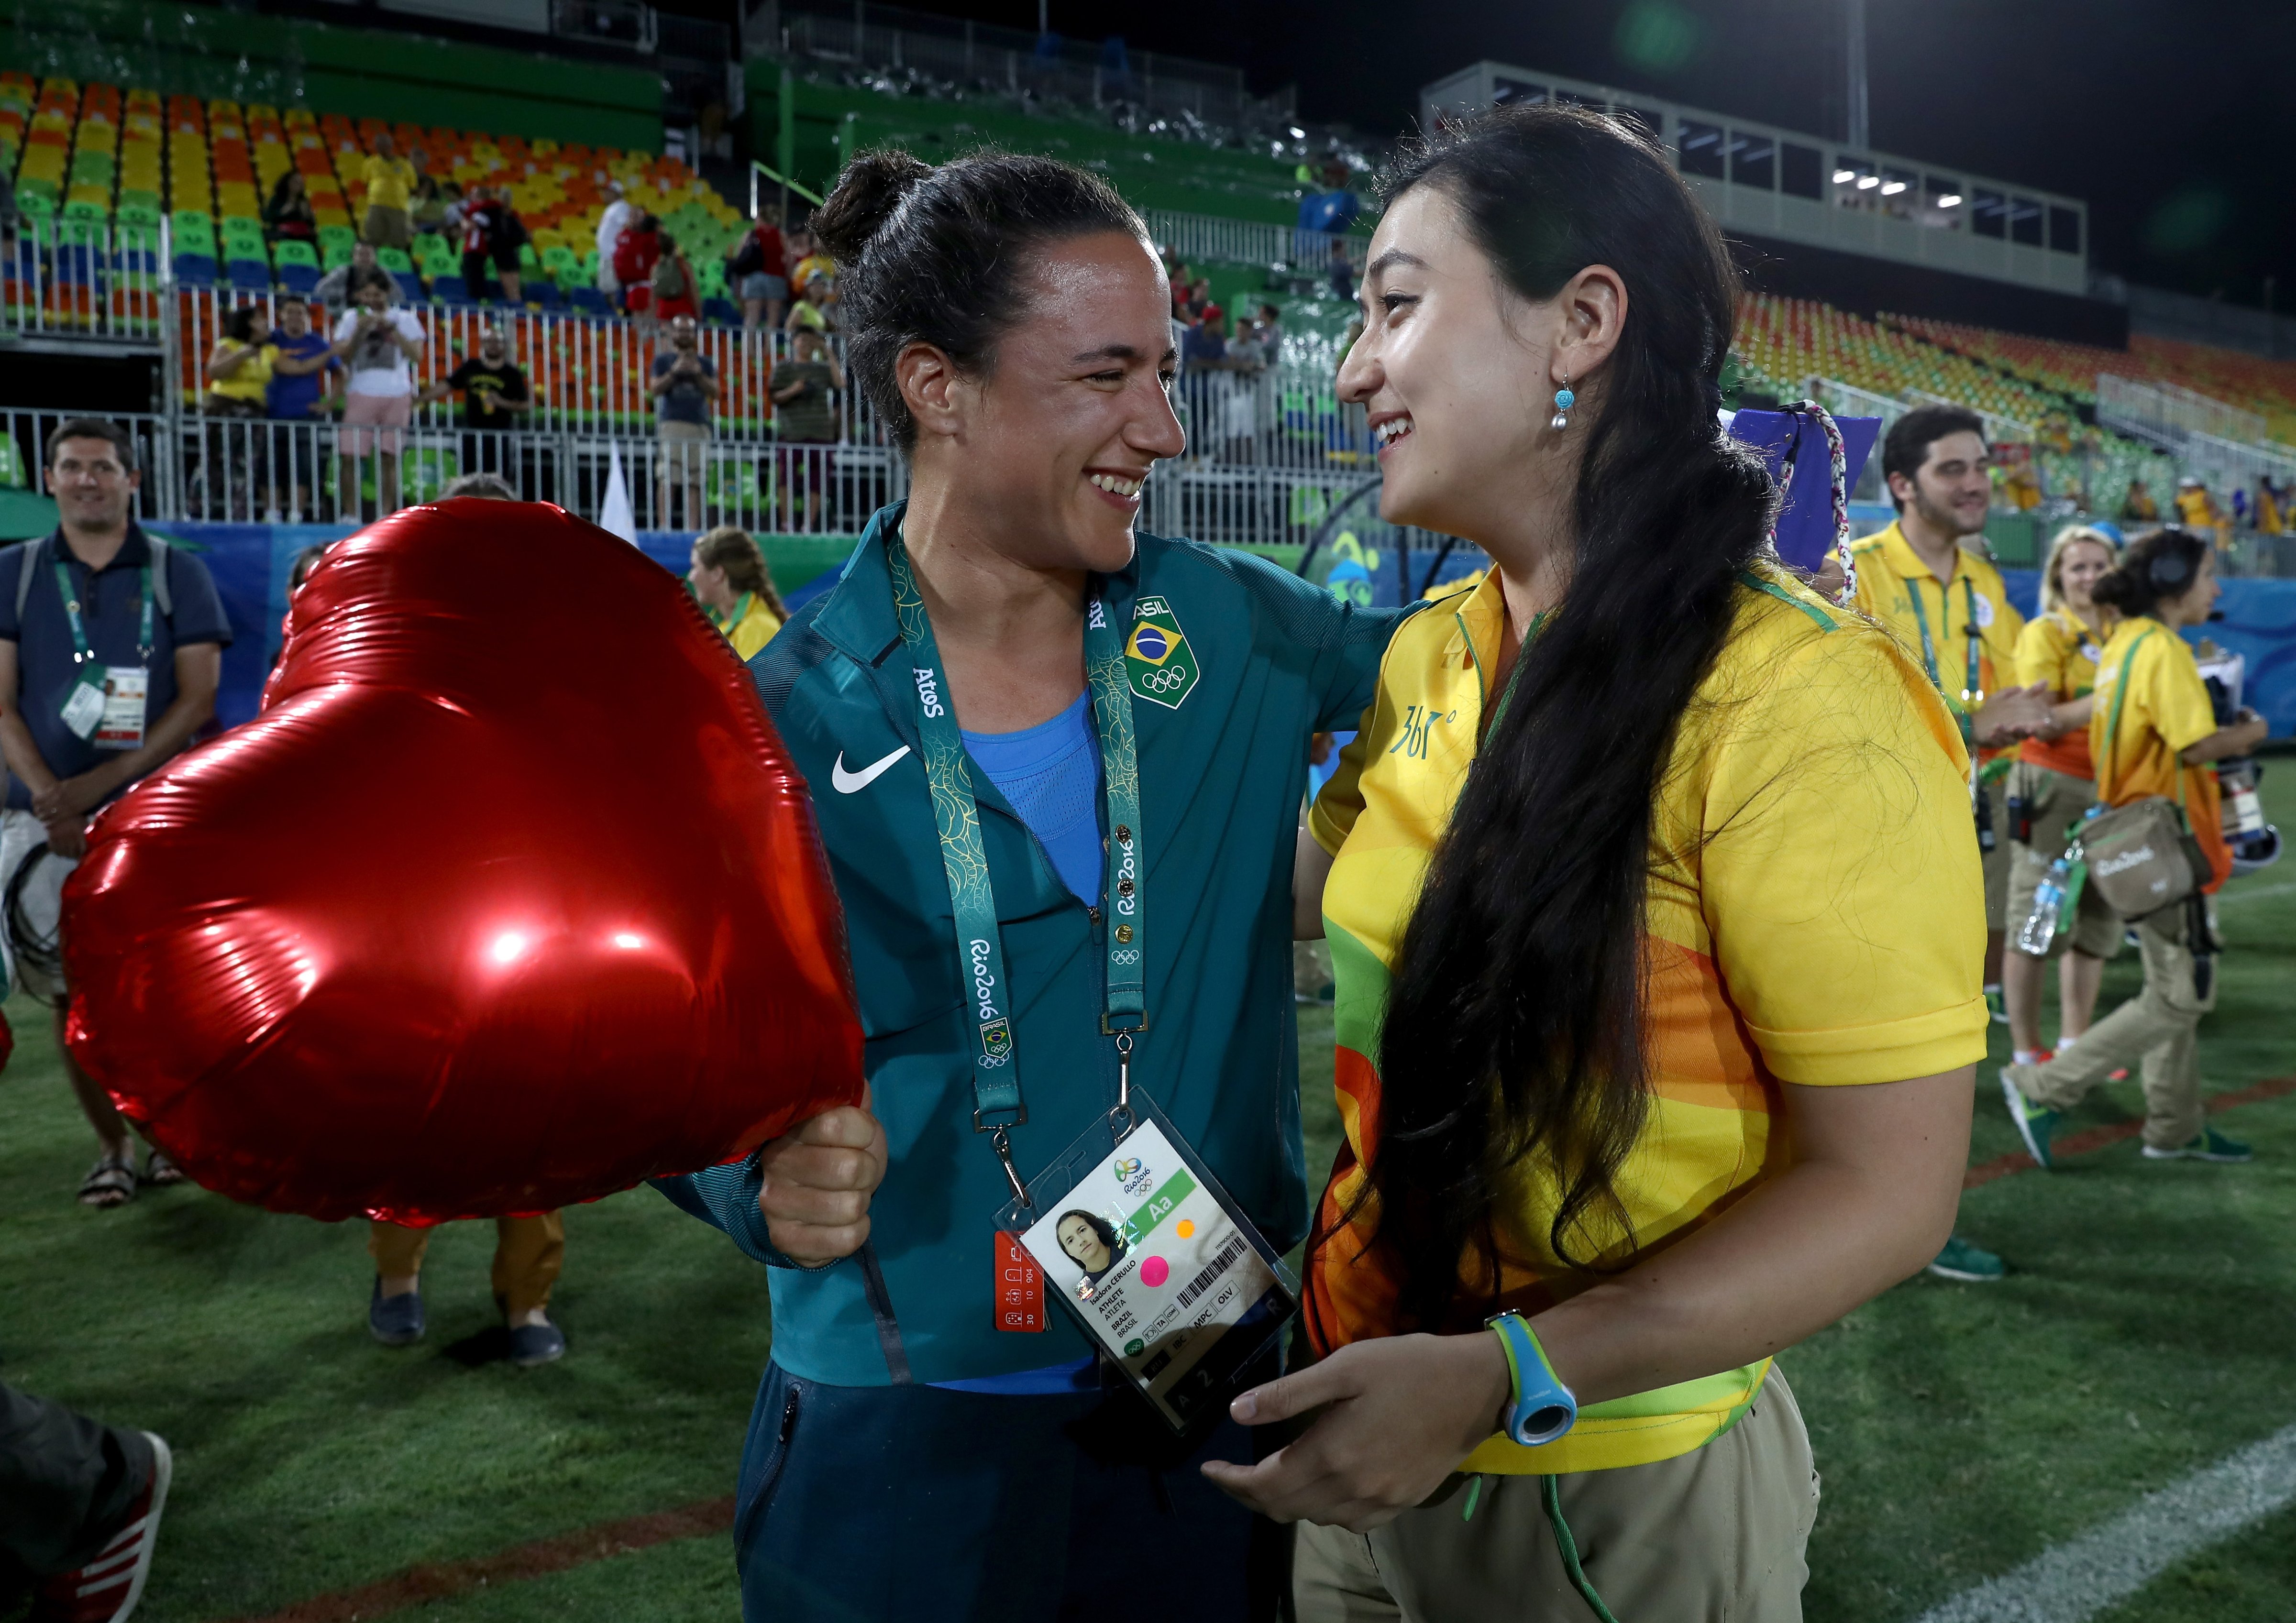 RIO DE JANEIRO, BRAZIL - AUGUST 08:  Volunteer Marjorie Enya (R) and rugby player Isadora Cerullo of Brazil smile after proposing marriage after the Women's Gold Medal Rugby Sevens match between Australia and New Zealand on Day 3 of the Rio 2016 Olympic Games at the Deodoro Stadium on August 8, 2016 in Rio de Janeiro, Brazil.  (Photo by David Rogers/Getty Images) (David Rogers/Getty Images)